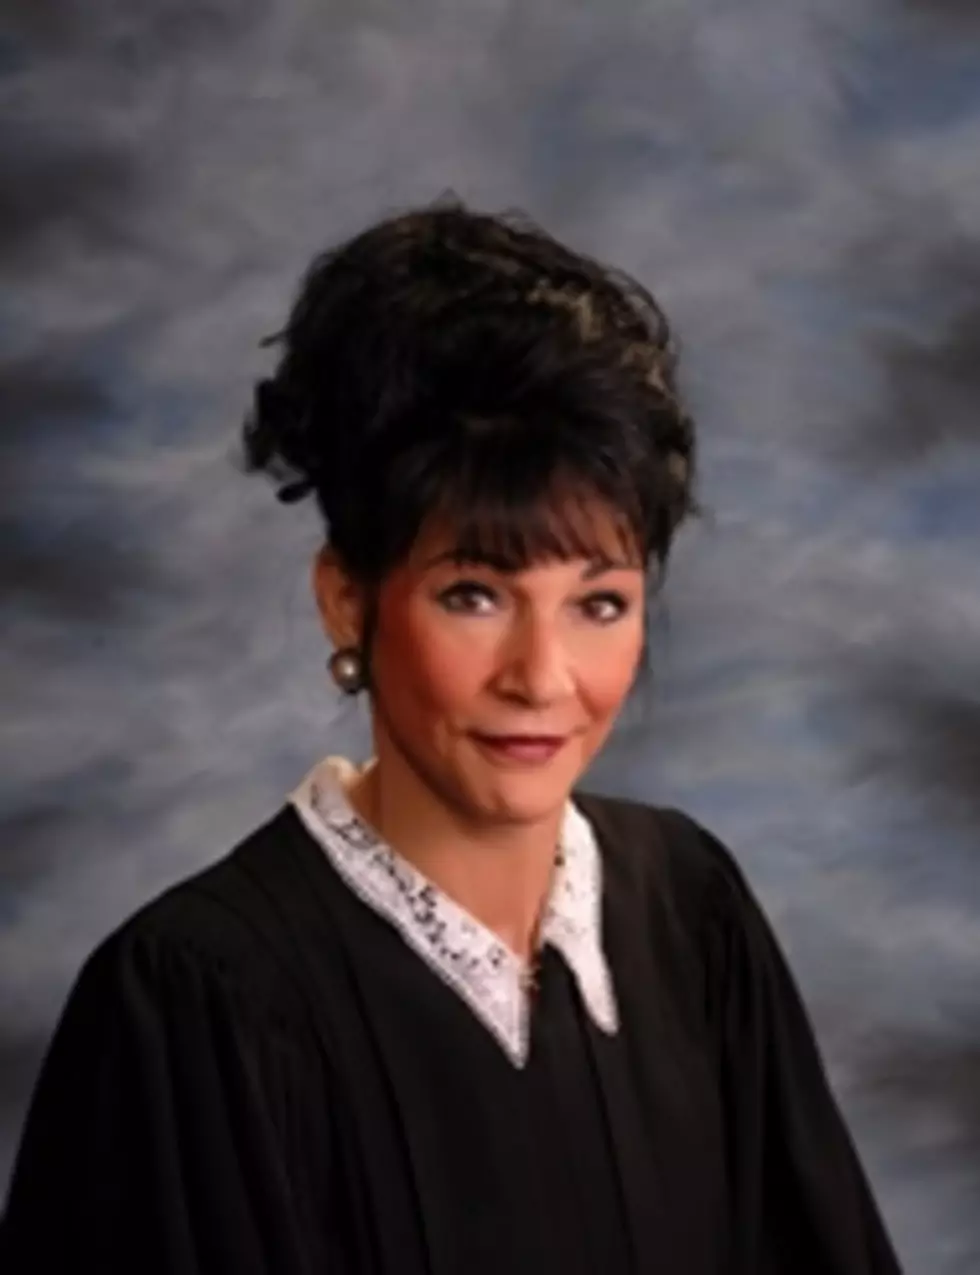 Ingham County Judge Part of Obstruction Probe